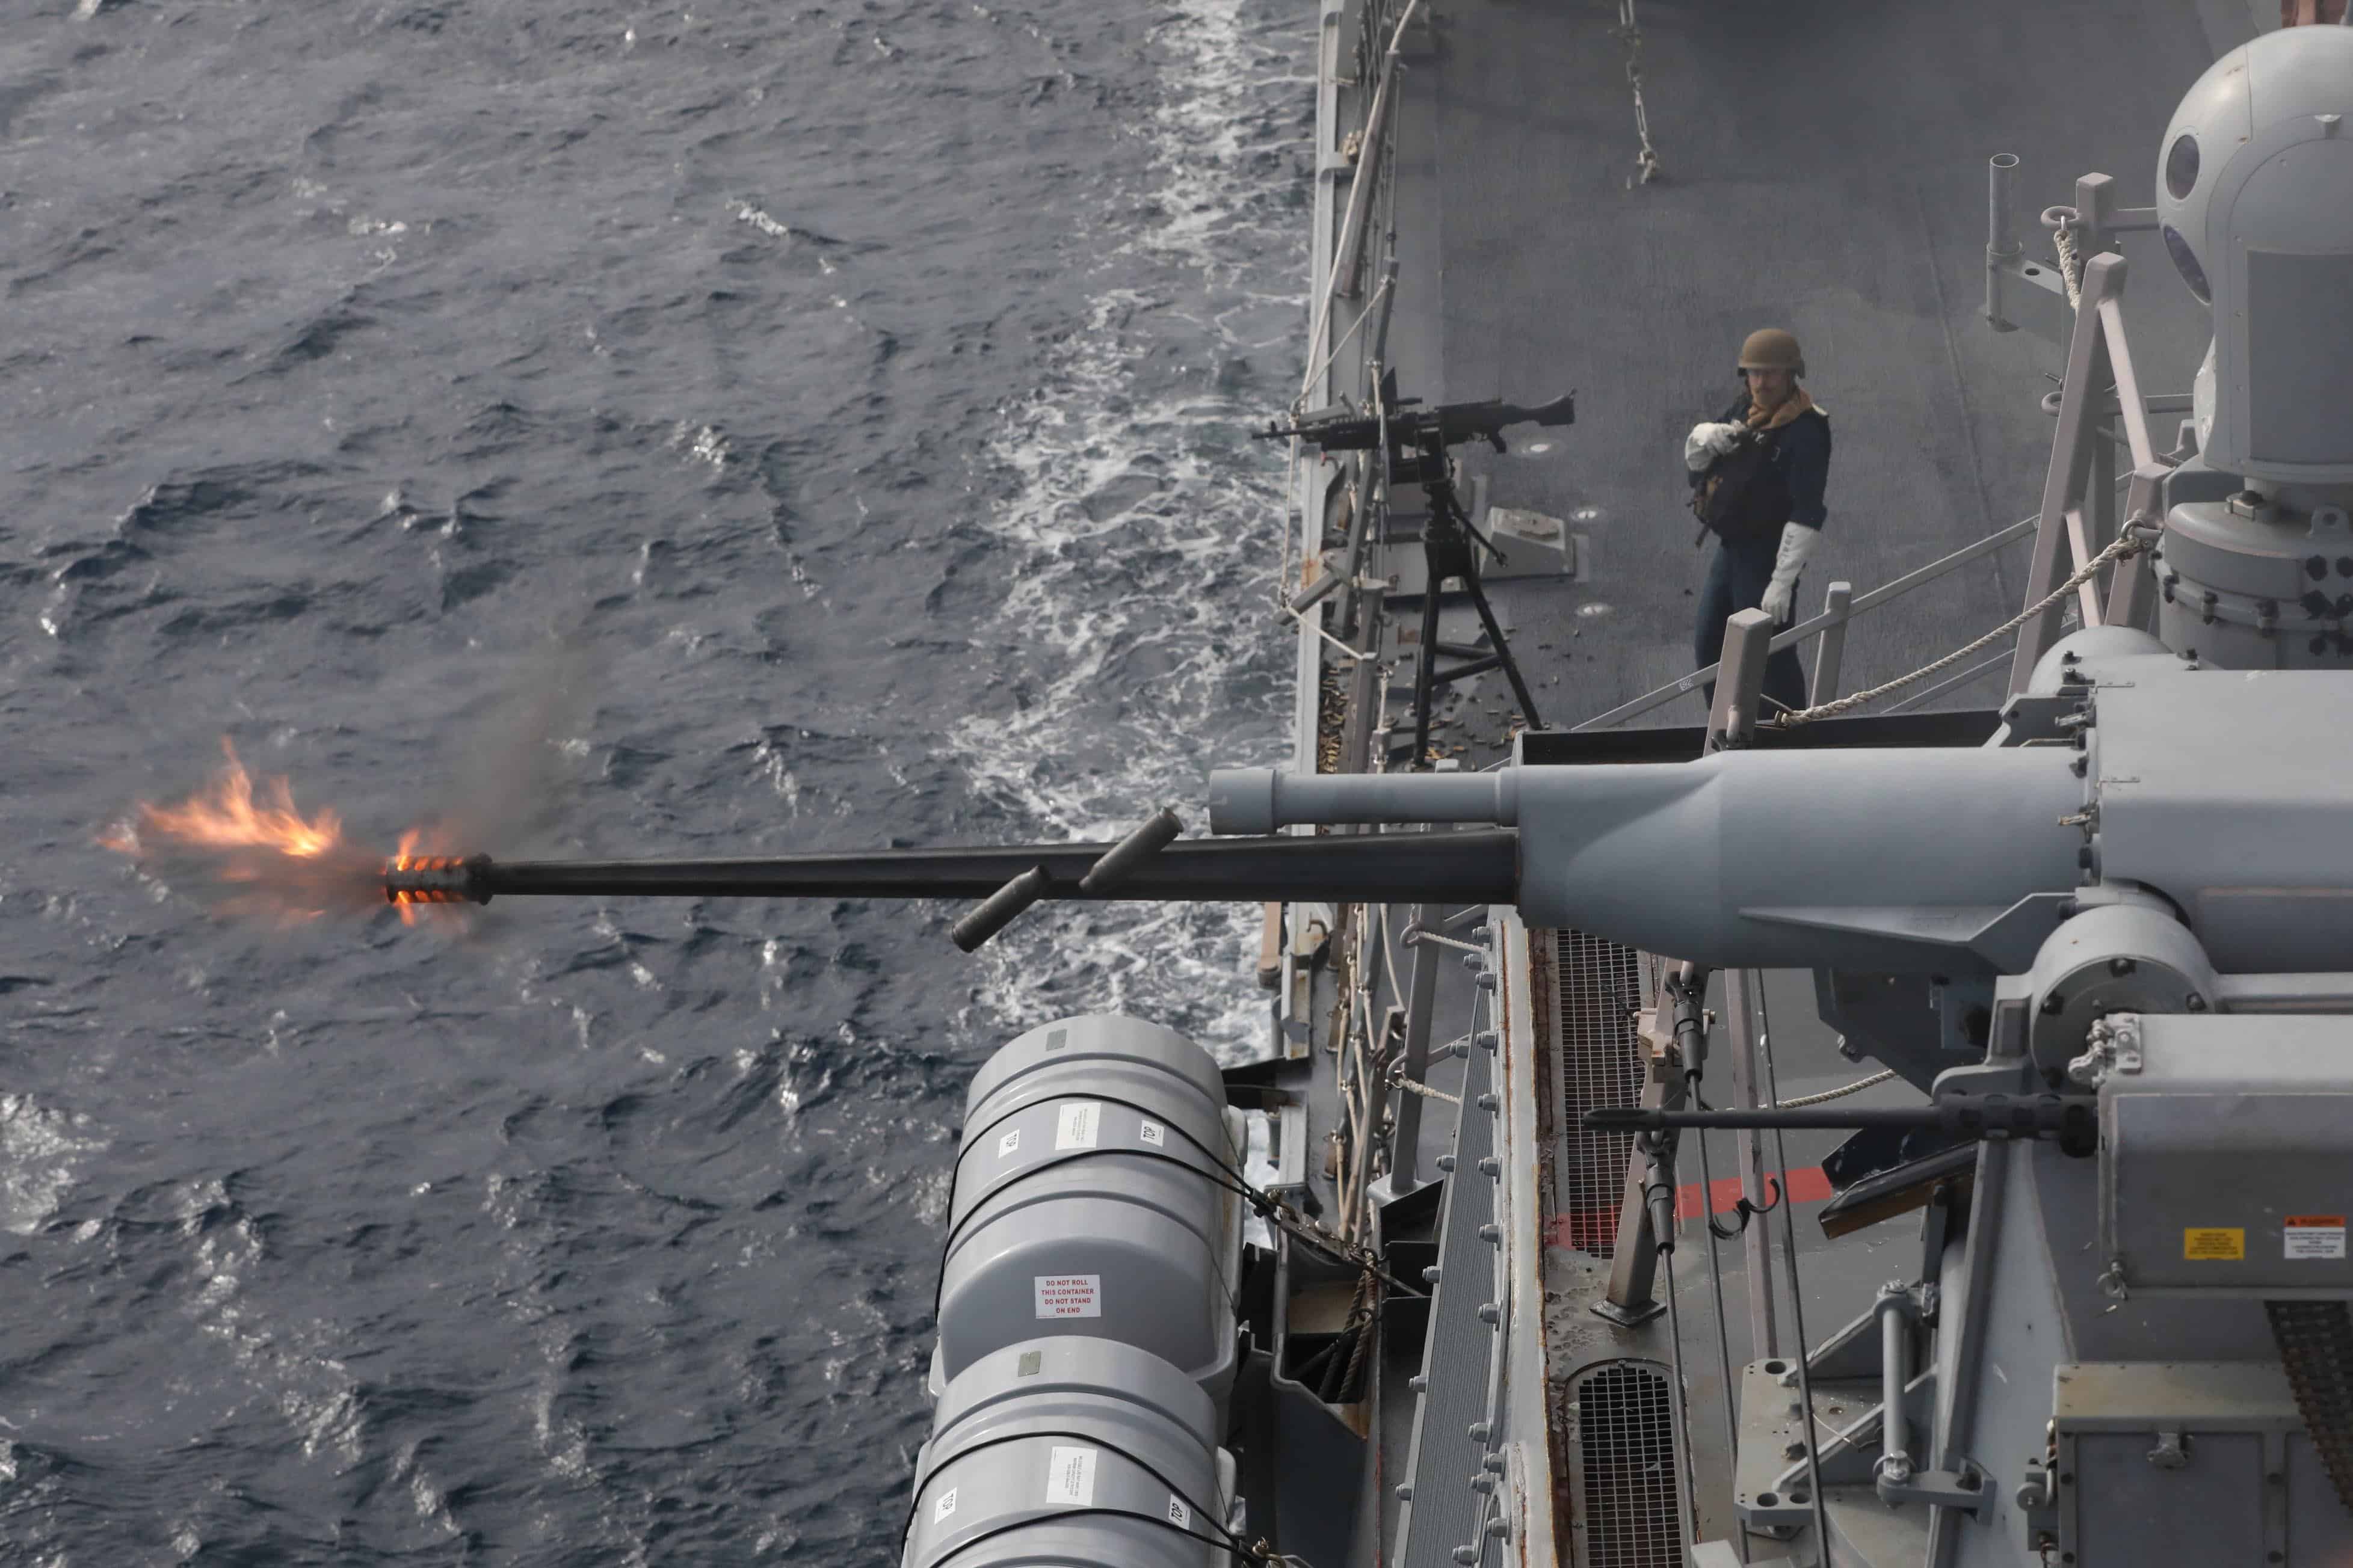 230302-N-AL206-1644 ATLANTIC OCEAN (March 2, 2023) The Arleigh Burke-class guided-missile destroyer USS Thomas Hudner (DDG 116) conducts a test of its M240 weapons in the Atlantic Ocean, March 4, 2023.